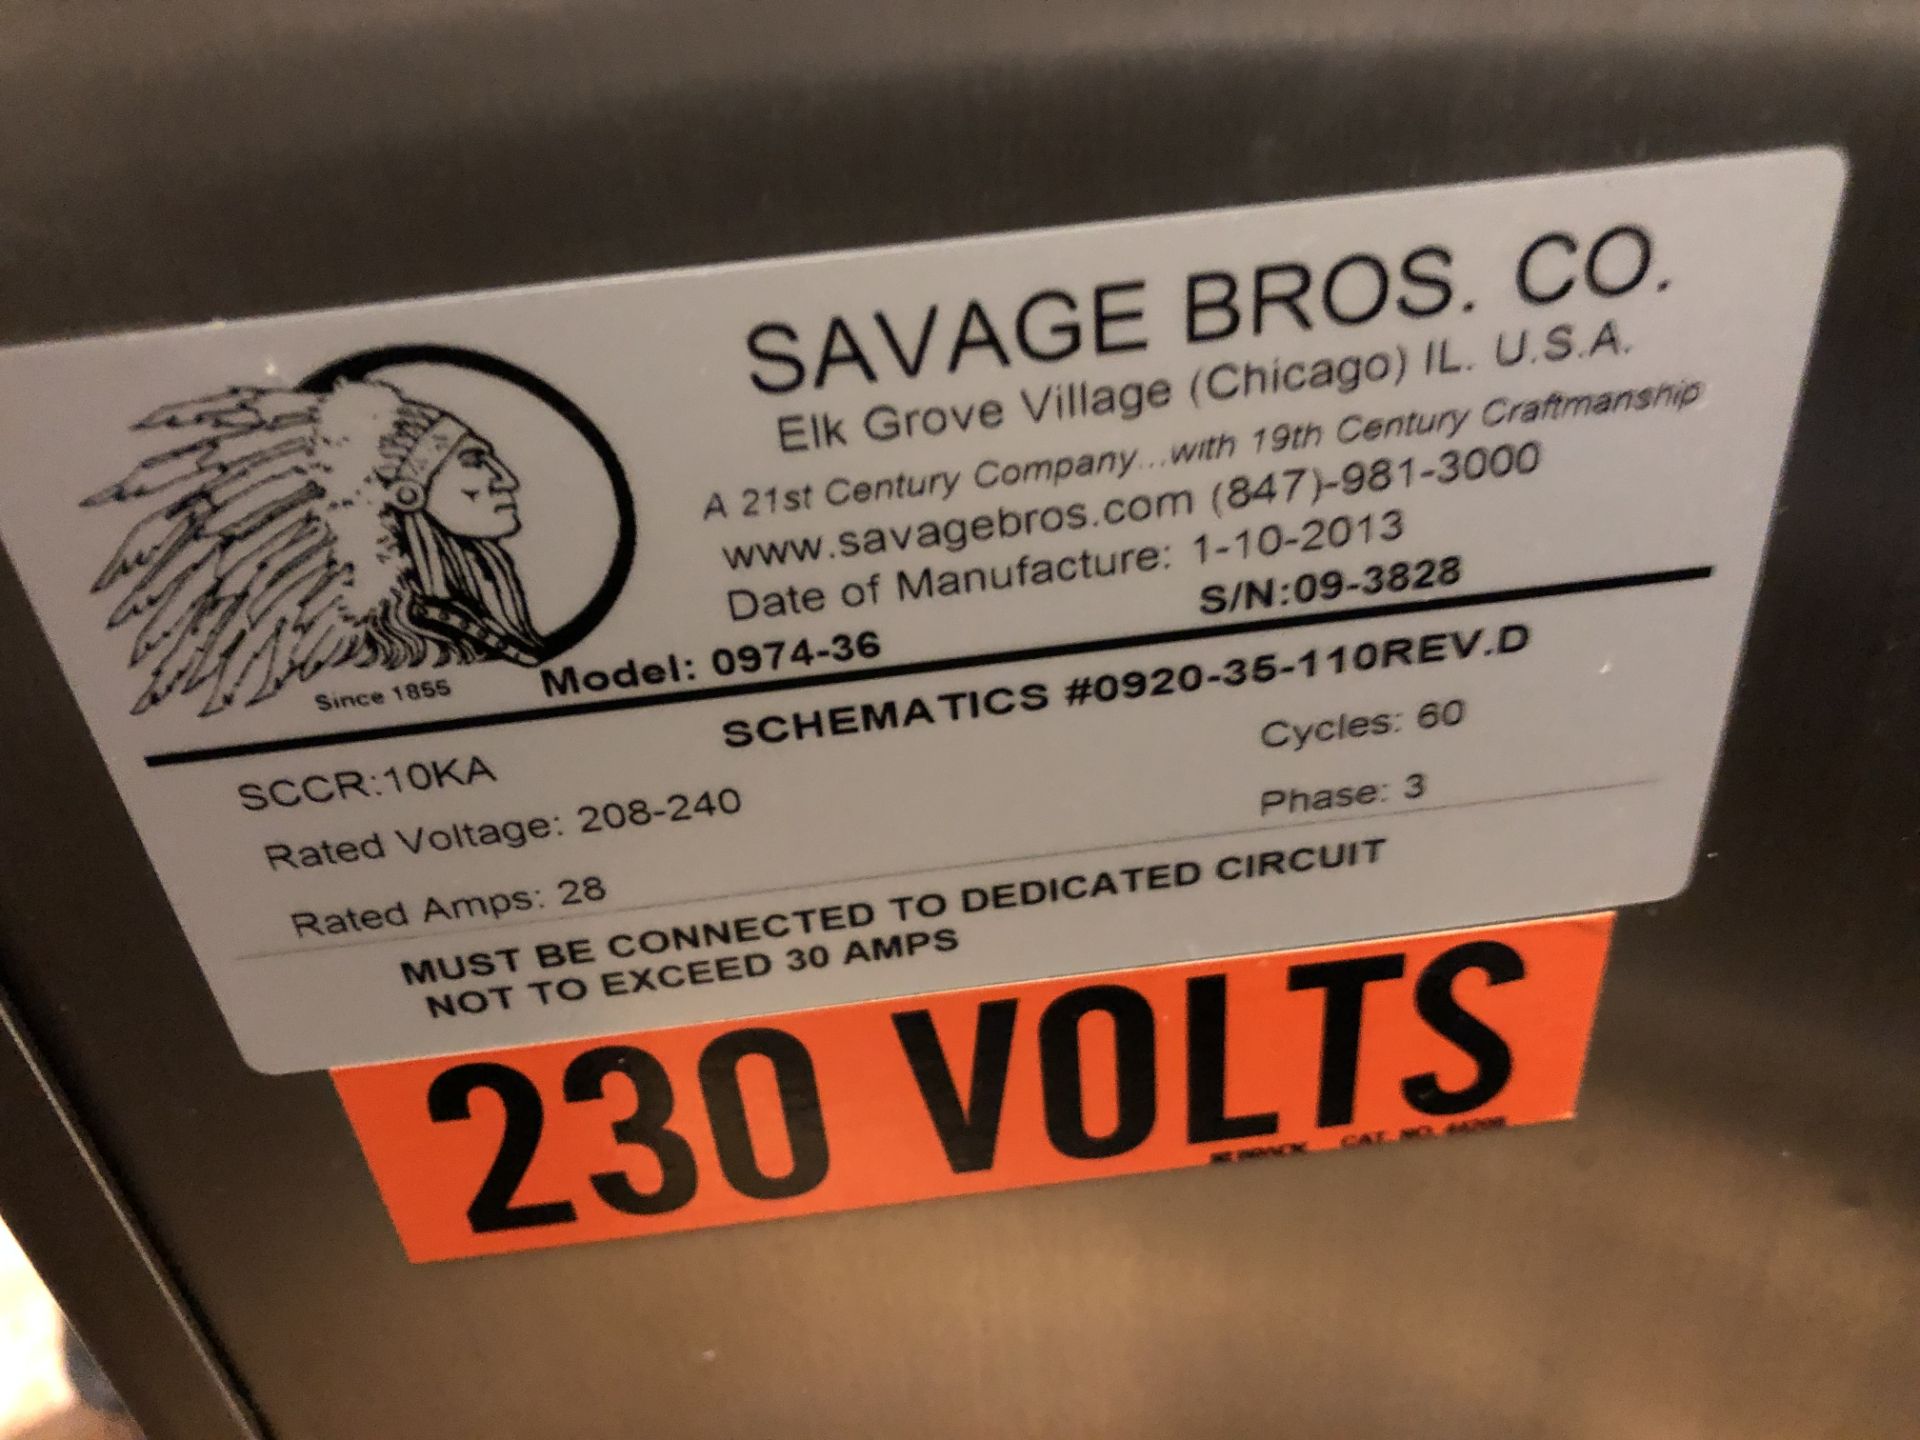 Savage Stainless Steel 1250-lb Melter, model 0974-36, High Temperature model for melting chocolate - Image 5 of 5